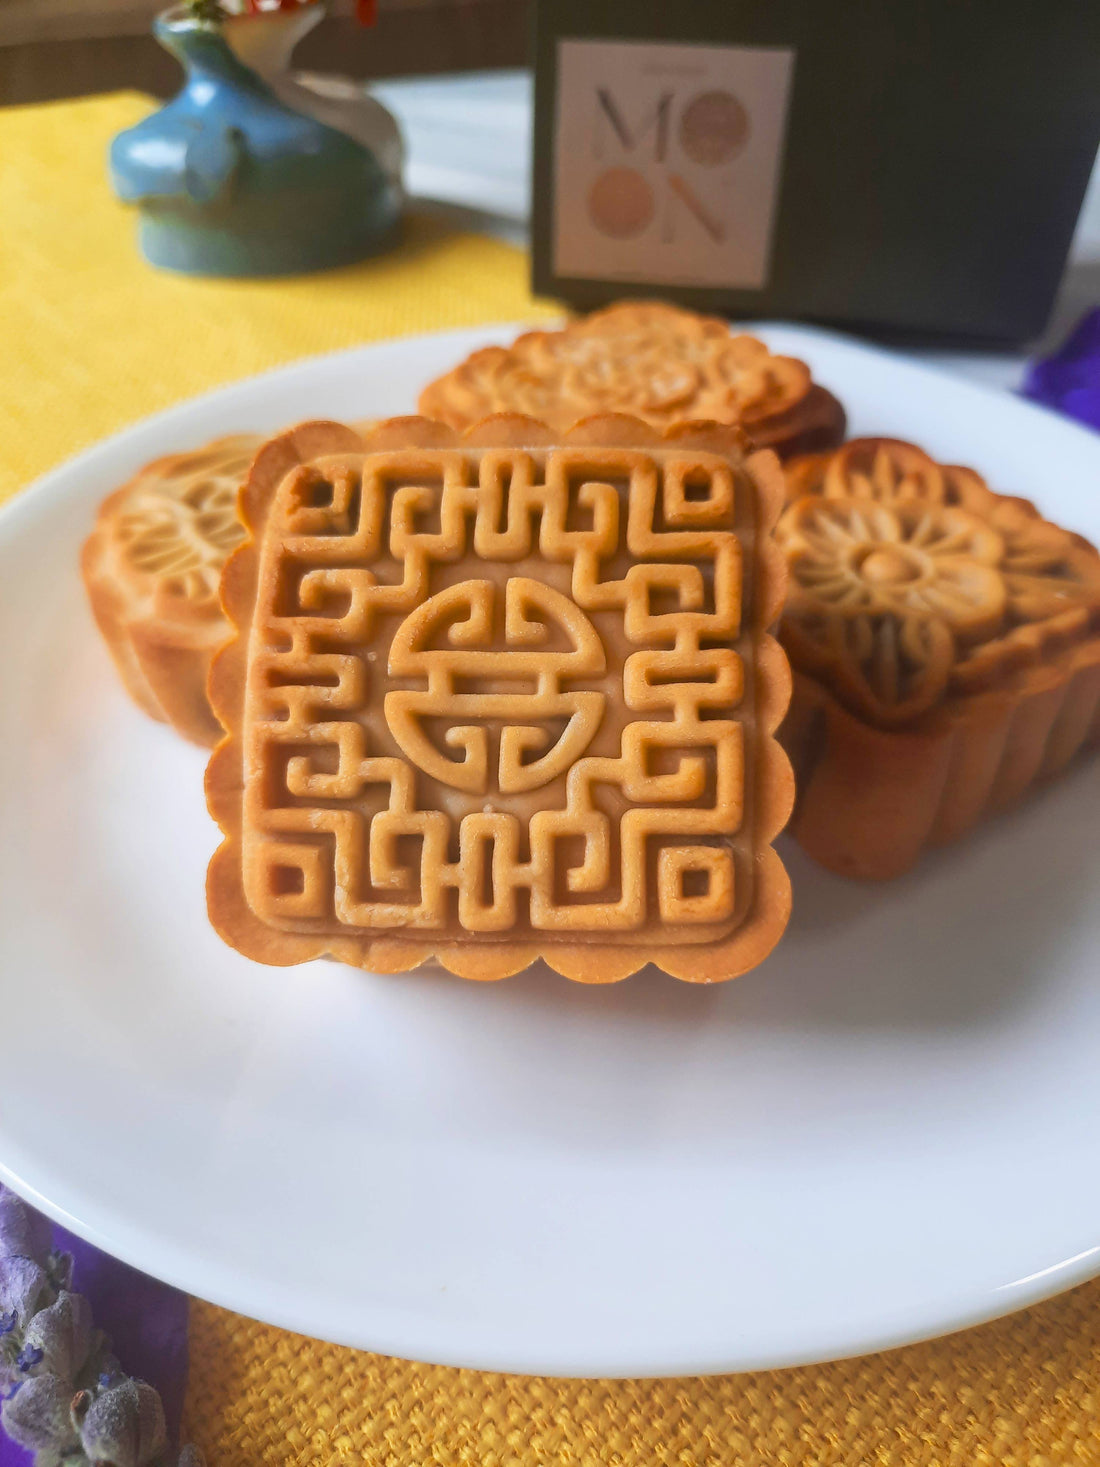 SF Chronicle: The Bay Area is in the middle of a mooncake renaissance